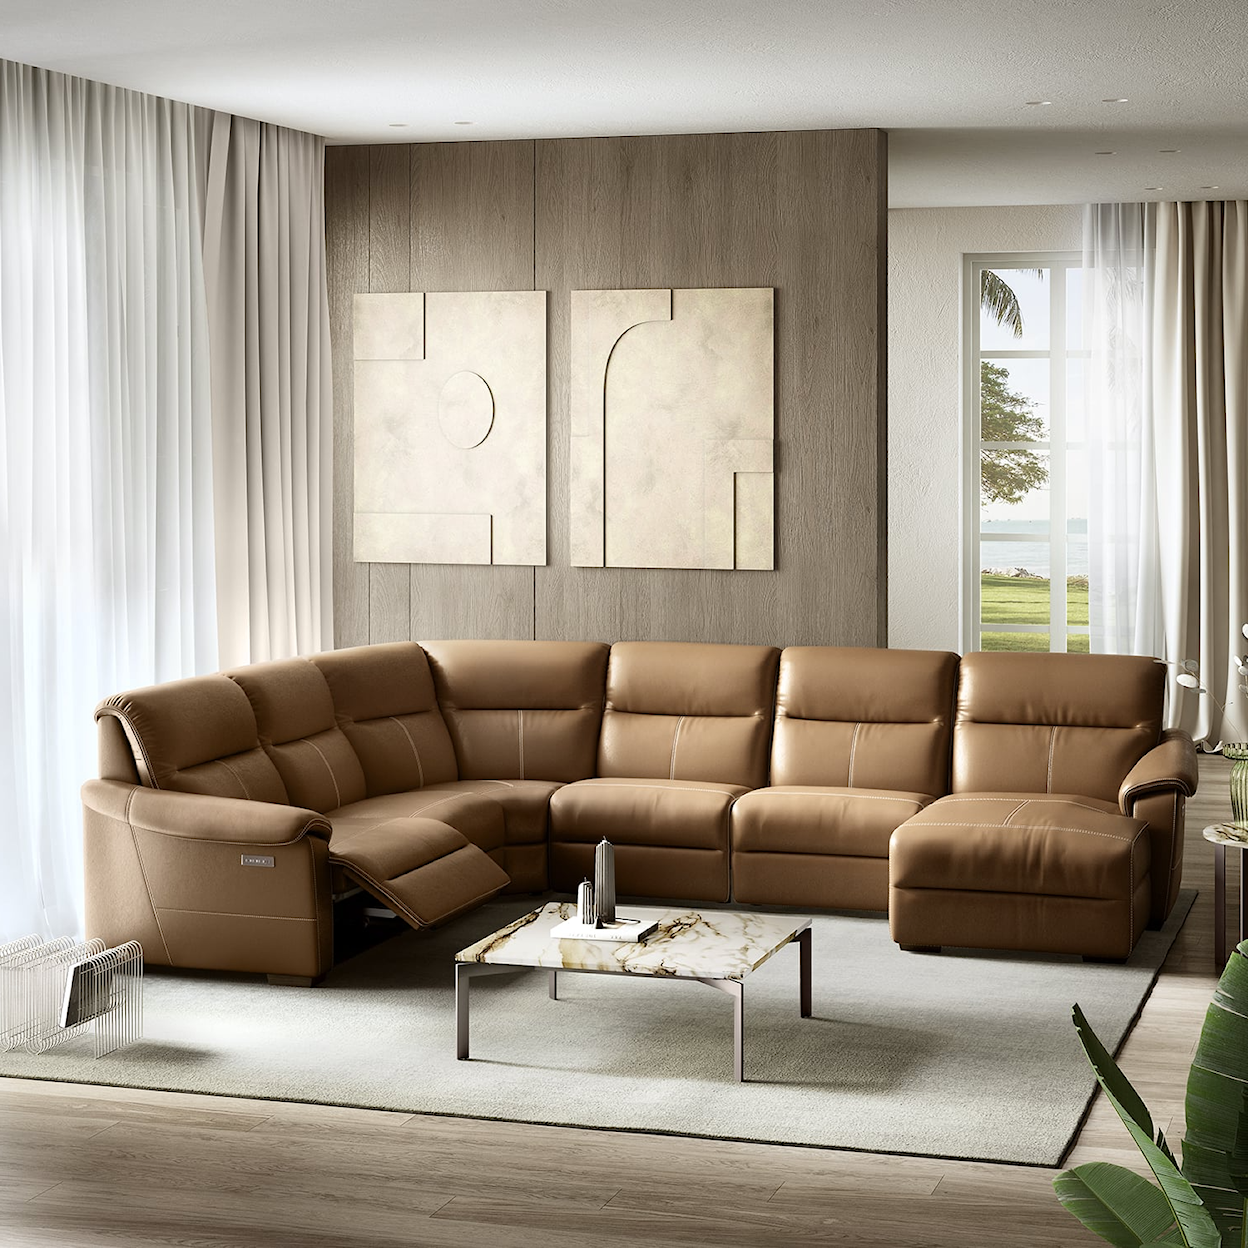 Natuzzi Editions 100% Italian Leather Potenza L-Shaped Sectional with Right Chaise